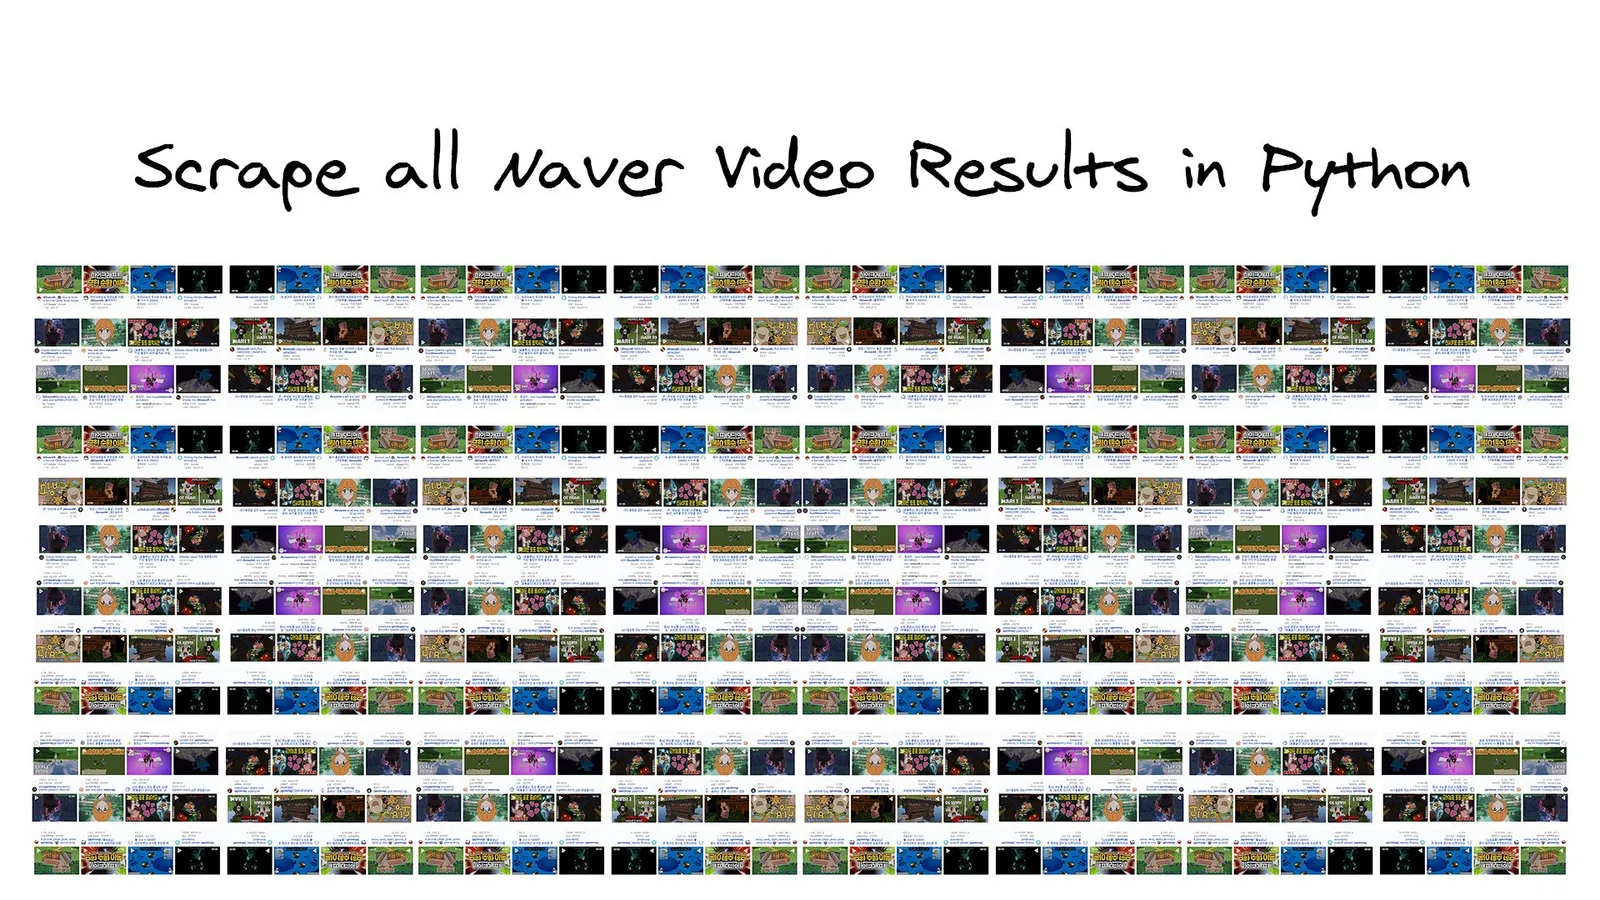 Scrape all Naver Video Results using pagination in Python